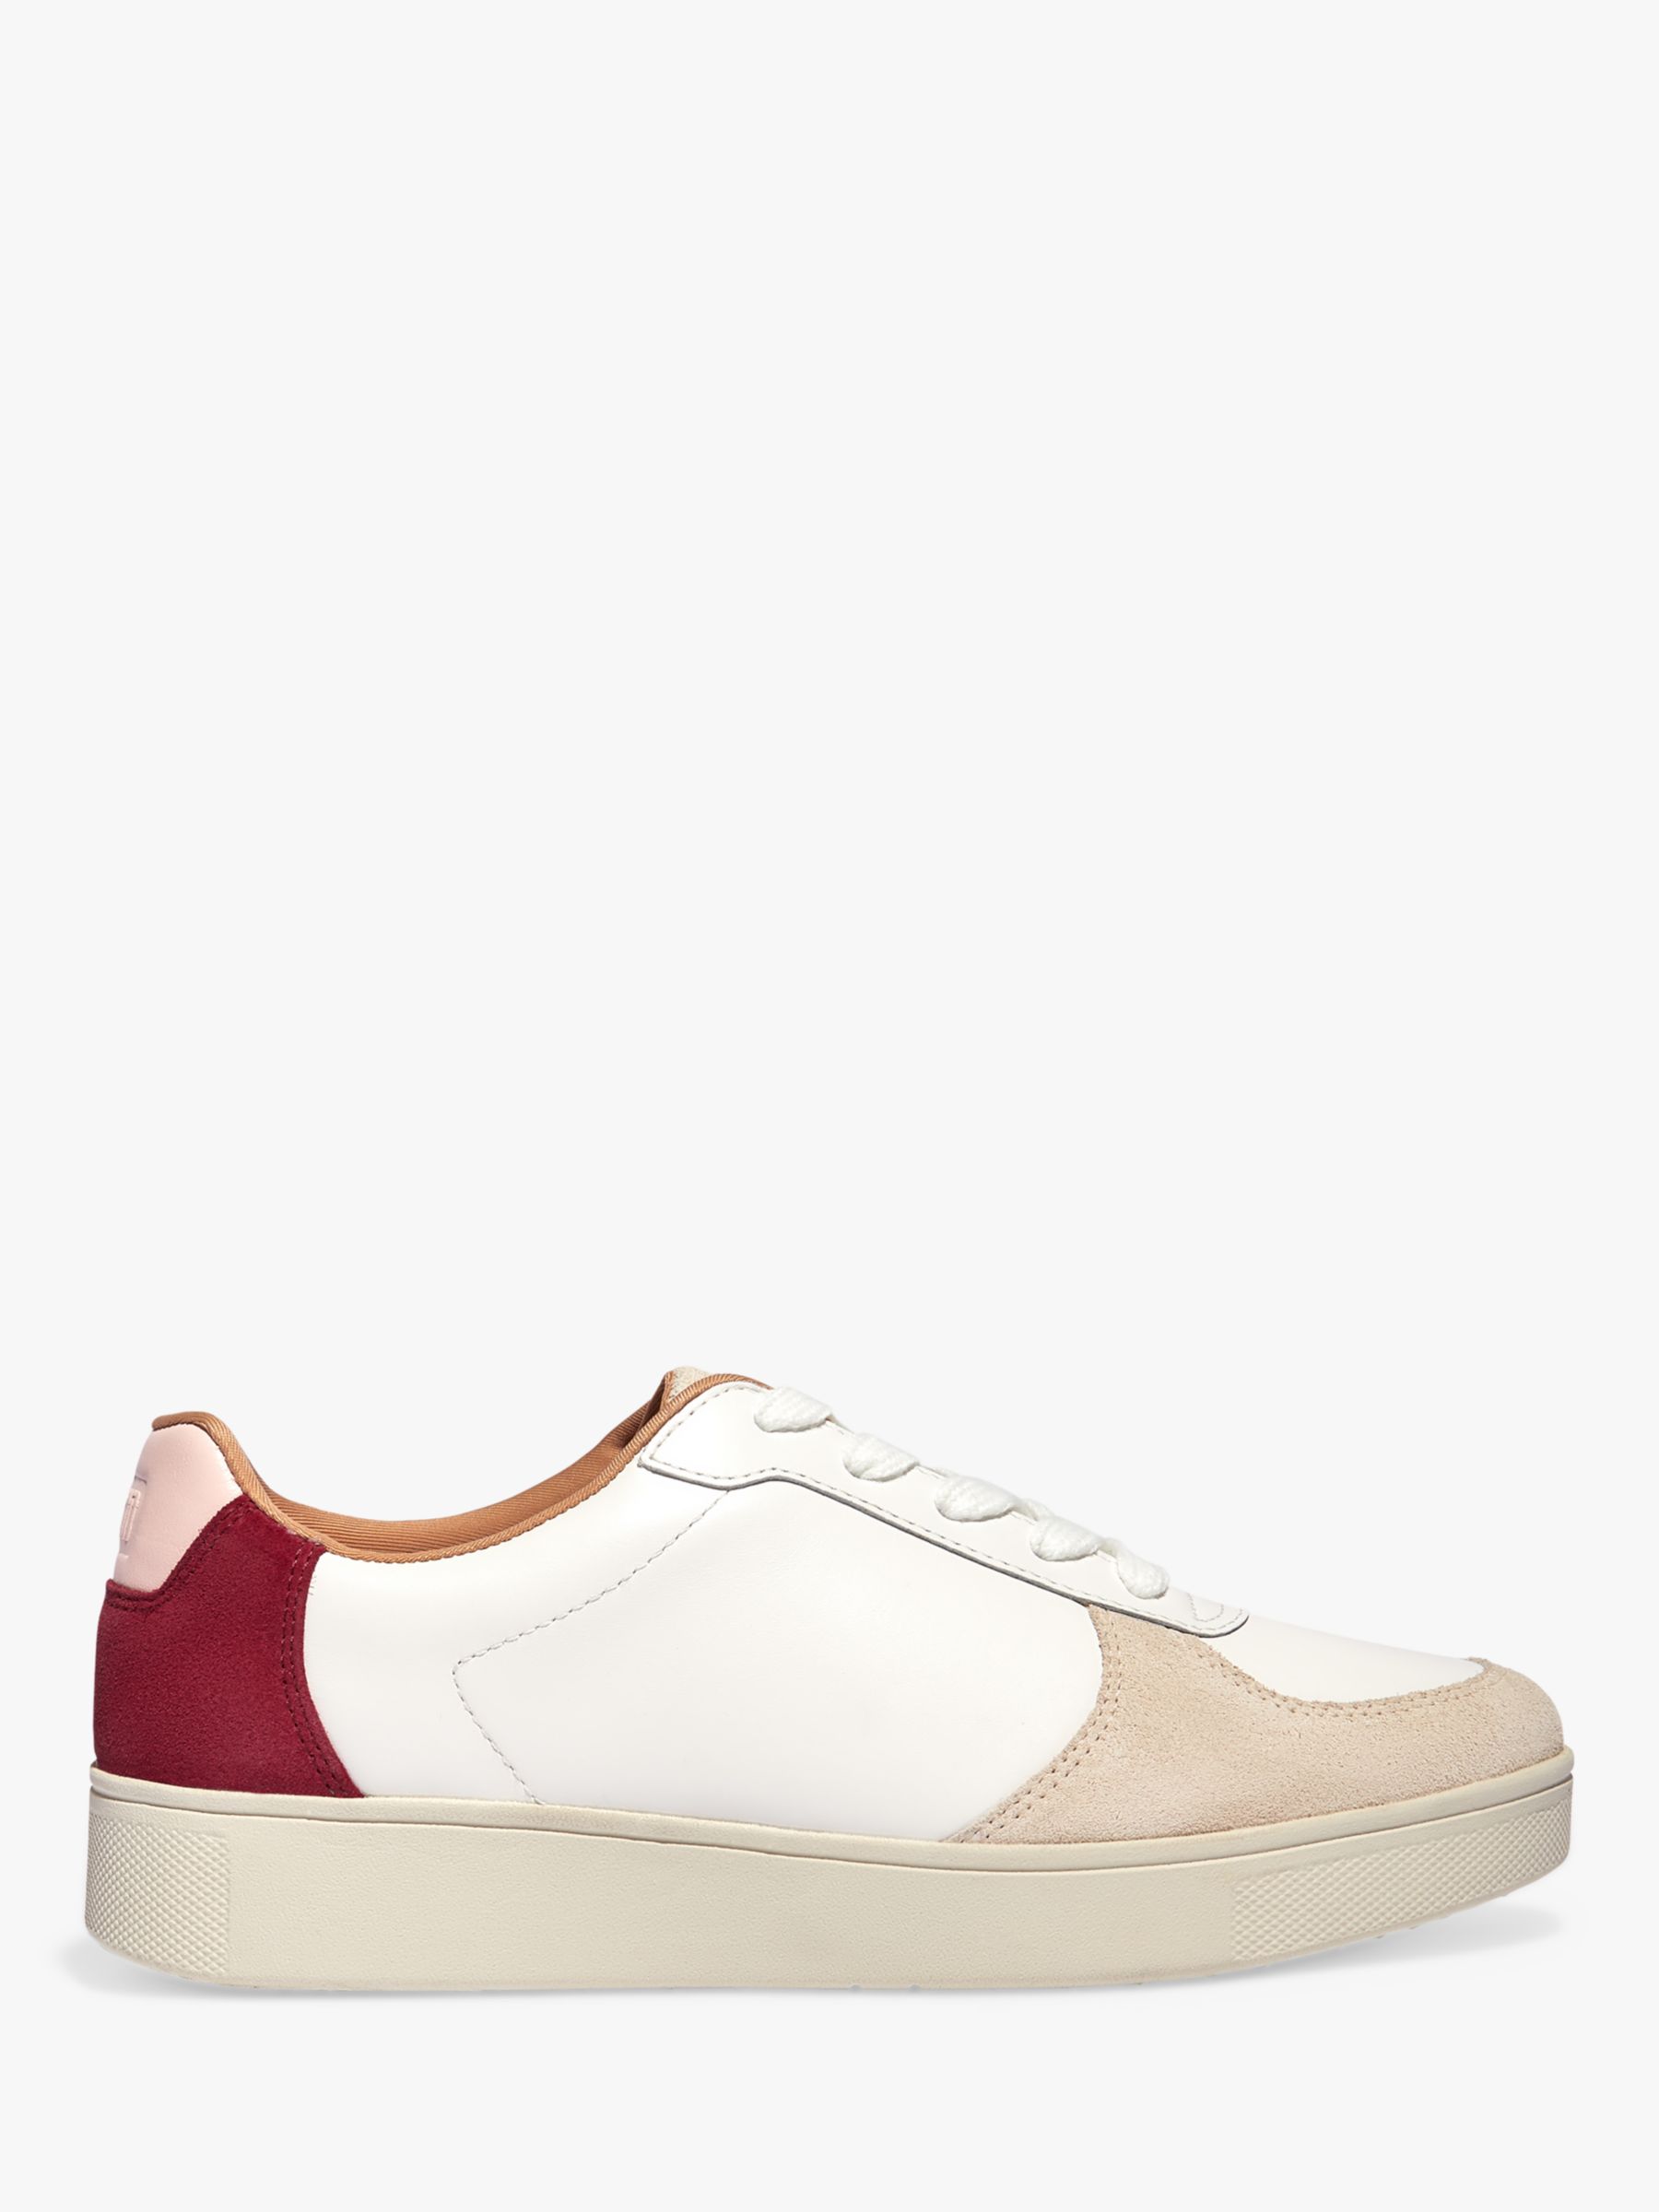 FitFlop Rally Leather Lace Up Trainers, White/Rich Red at John Lewis ...